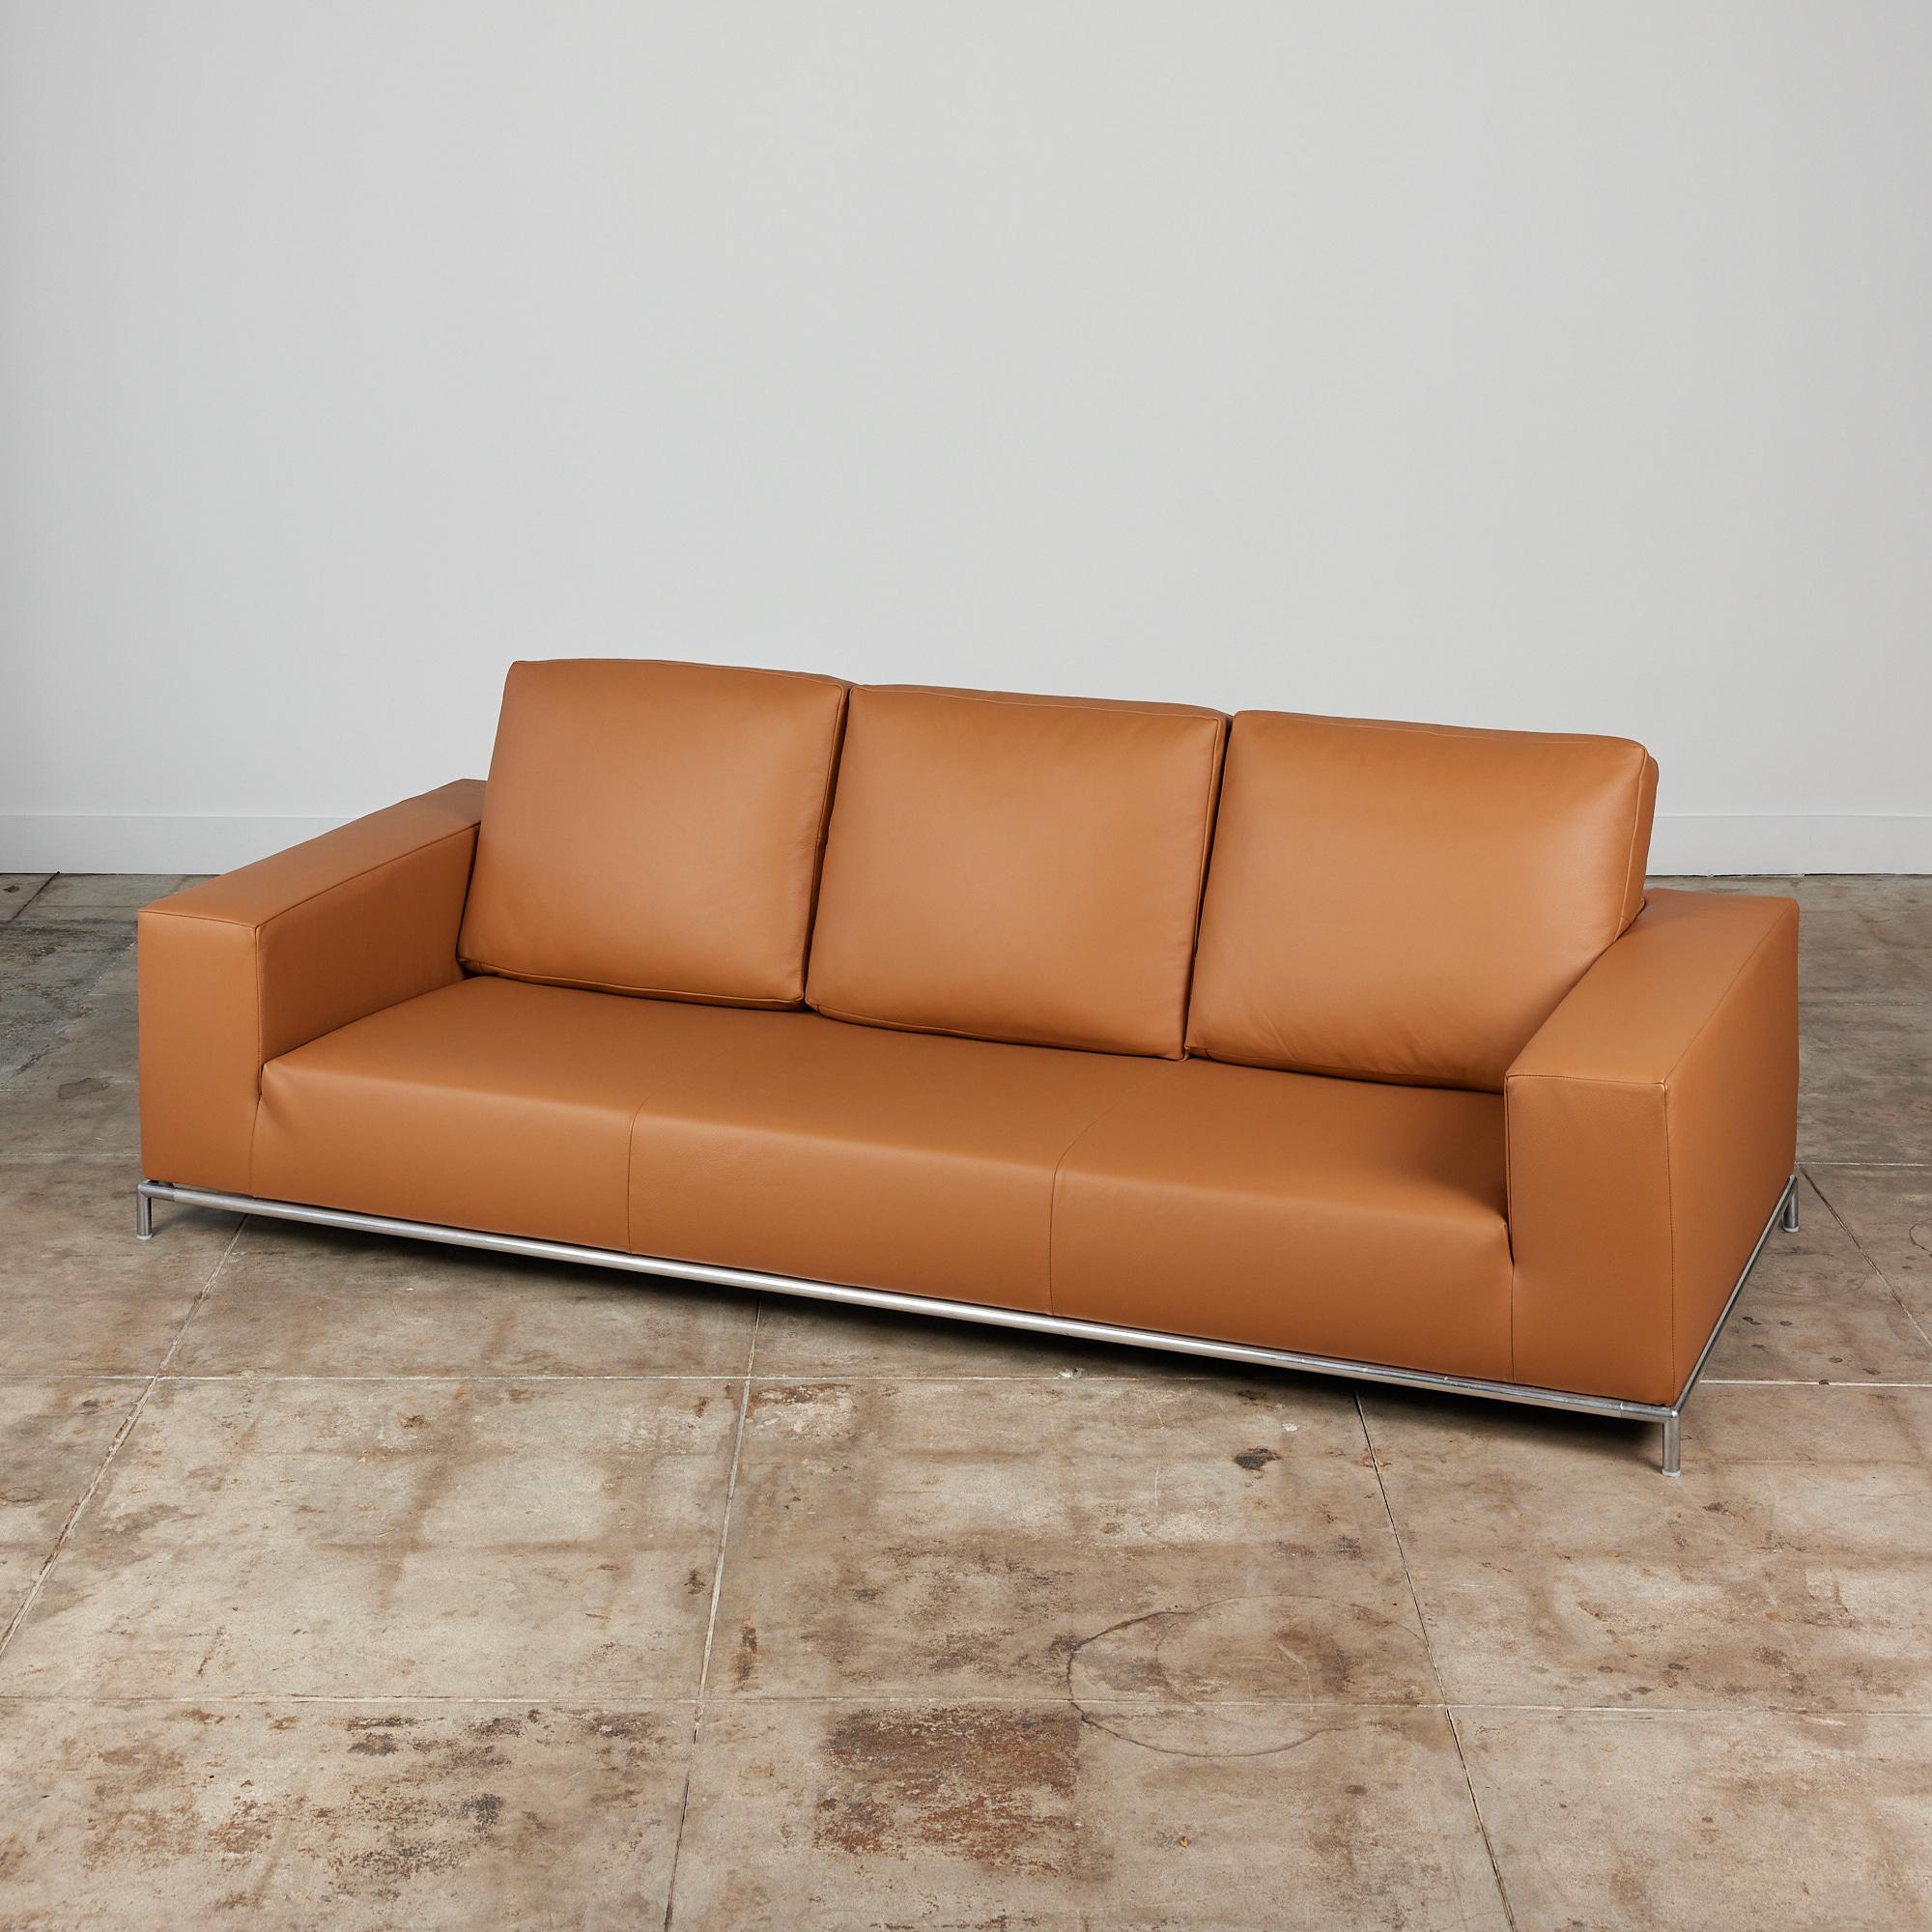 George sofa by Antonio Citterio for B&B Italia, c.2006, Italy. The three seater sofa features a slim tubular steel frame and has been newly reupholstered in a supple camel colored Edelman leather. The sofa has a deep seat and three over sized